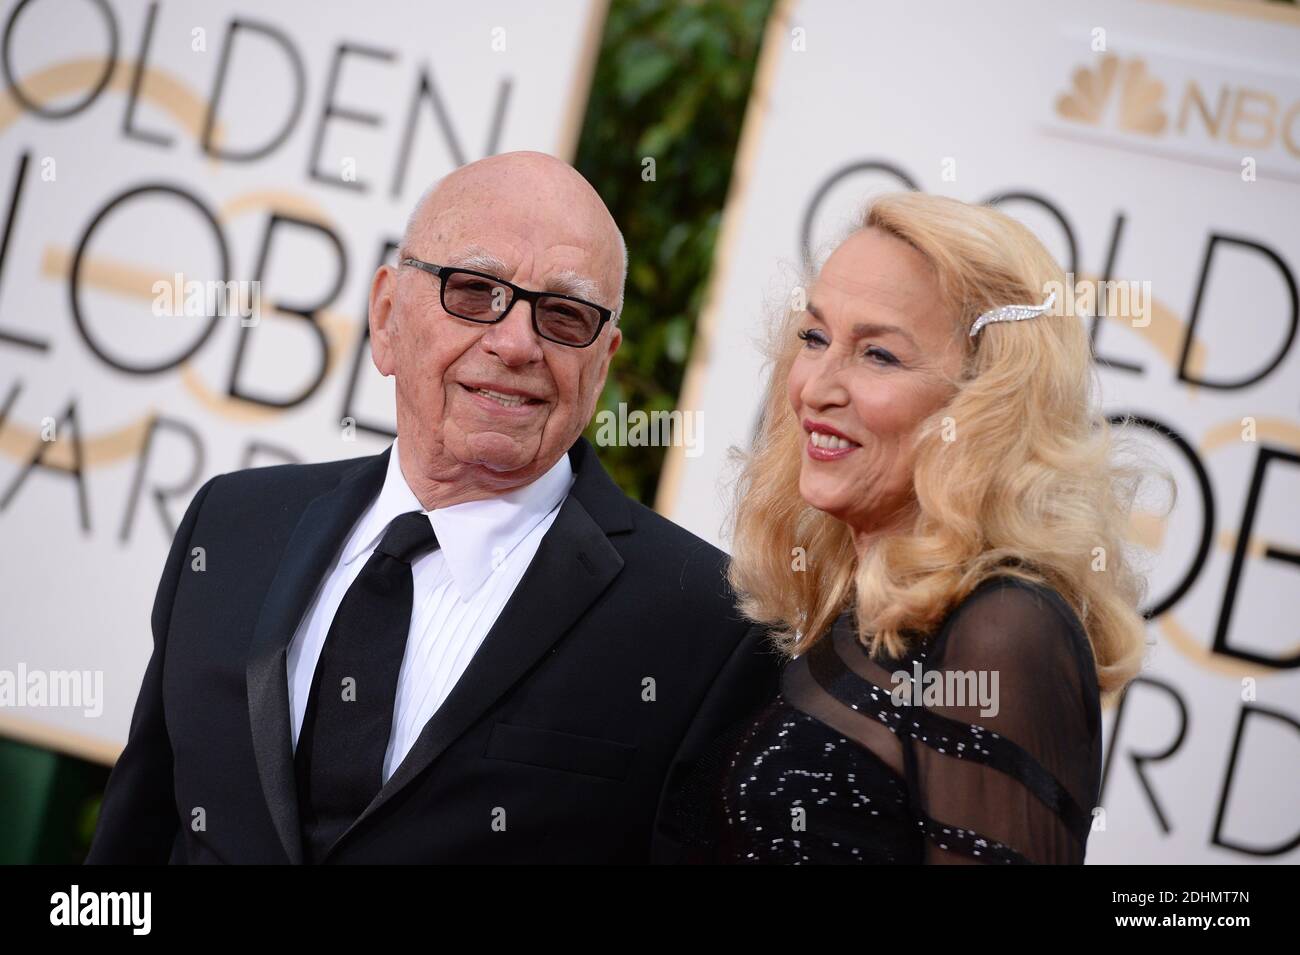 File photo : Jerry Hall and Rupert Murdoch attend the 73rd Annual Golden Globe Awards held at the Beverly Hilton Hotel in Los Angeles, CA, USA, January 10, 2016. Media mogul Rupert Murdoch and former supermodel Jerry Hall have announced their engagement after a whirlwind four-month romance. Mr Murdoch, 84, the executive chairman of News Corporation, which owns The Times, announced the news on the Births, Marriages and Deaths page of the newspaper. Photo by Lionel Hahn/ABACAPRESS.COM Stock Photo